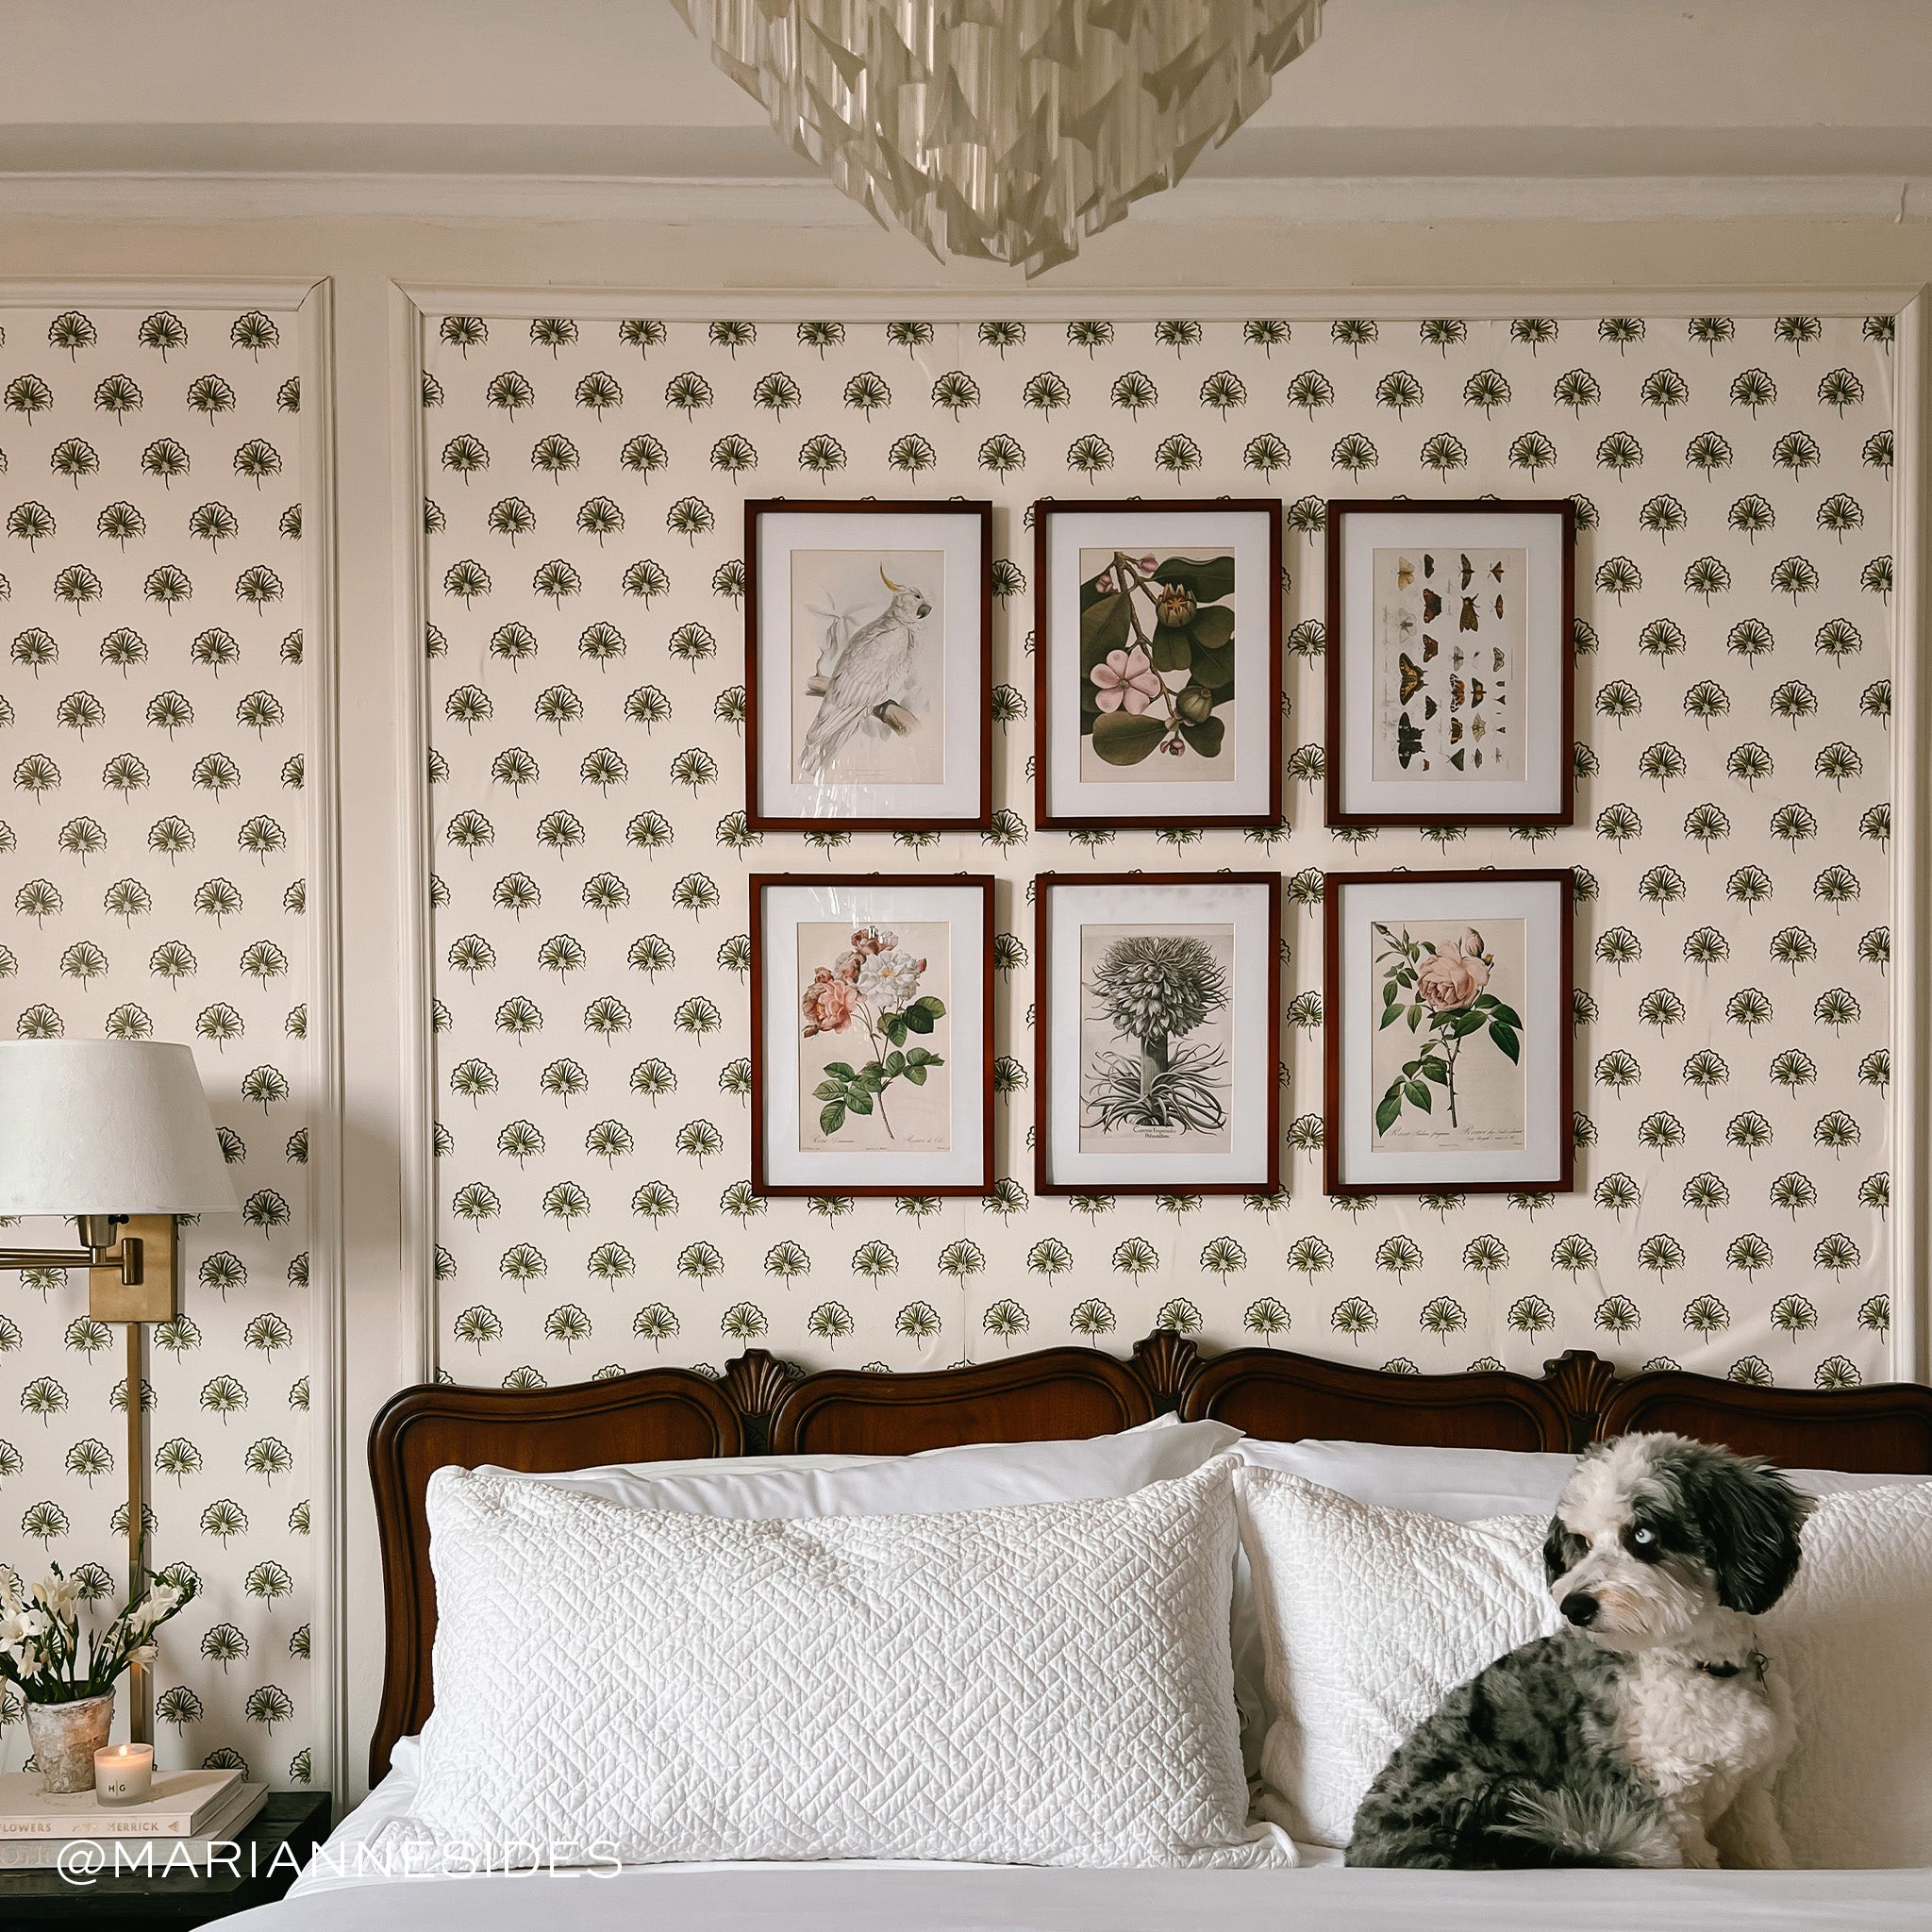 White bed close-up styled with 6 frames hung on Green Floral Printed Wallpaper and white and black dog on bed. Photo taken by Marianne Sides